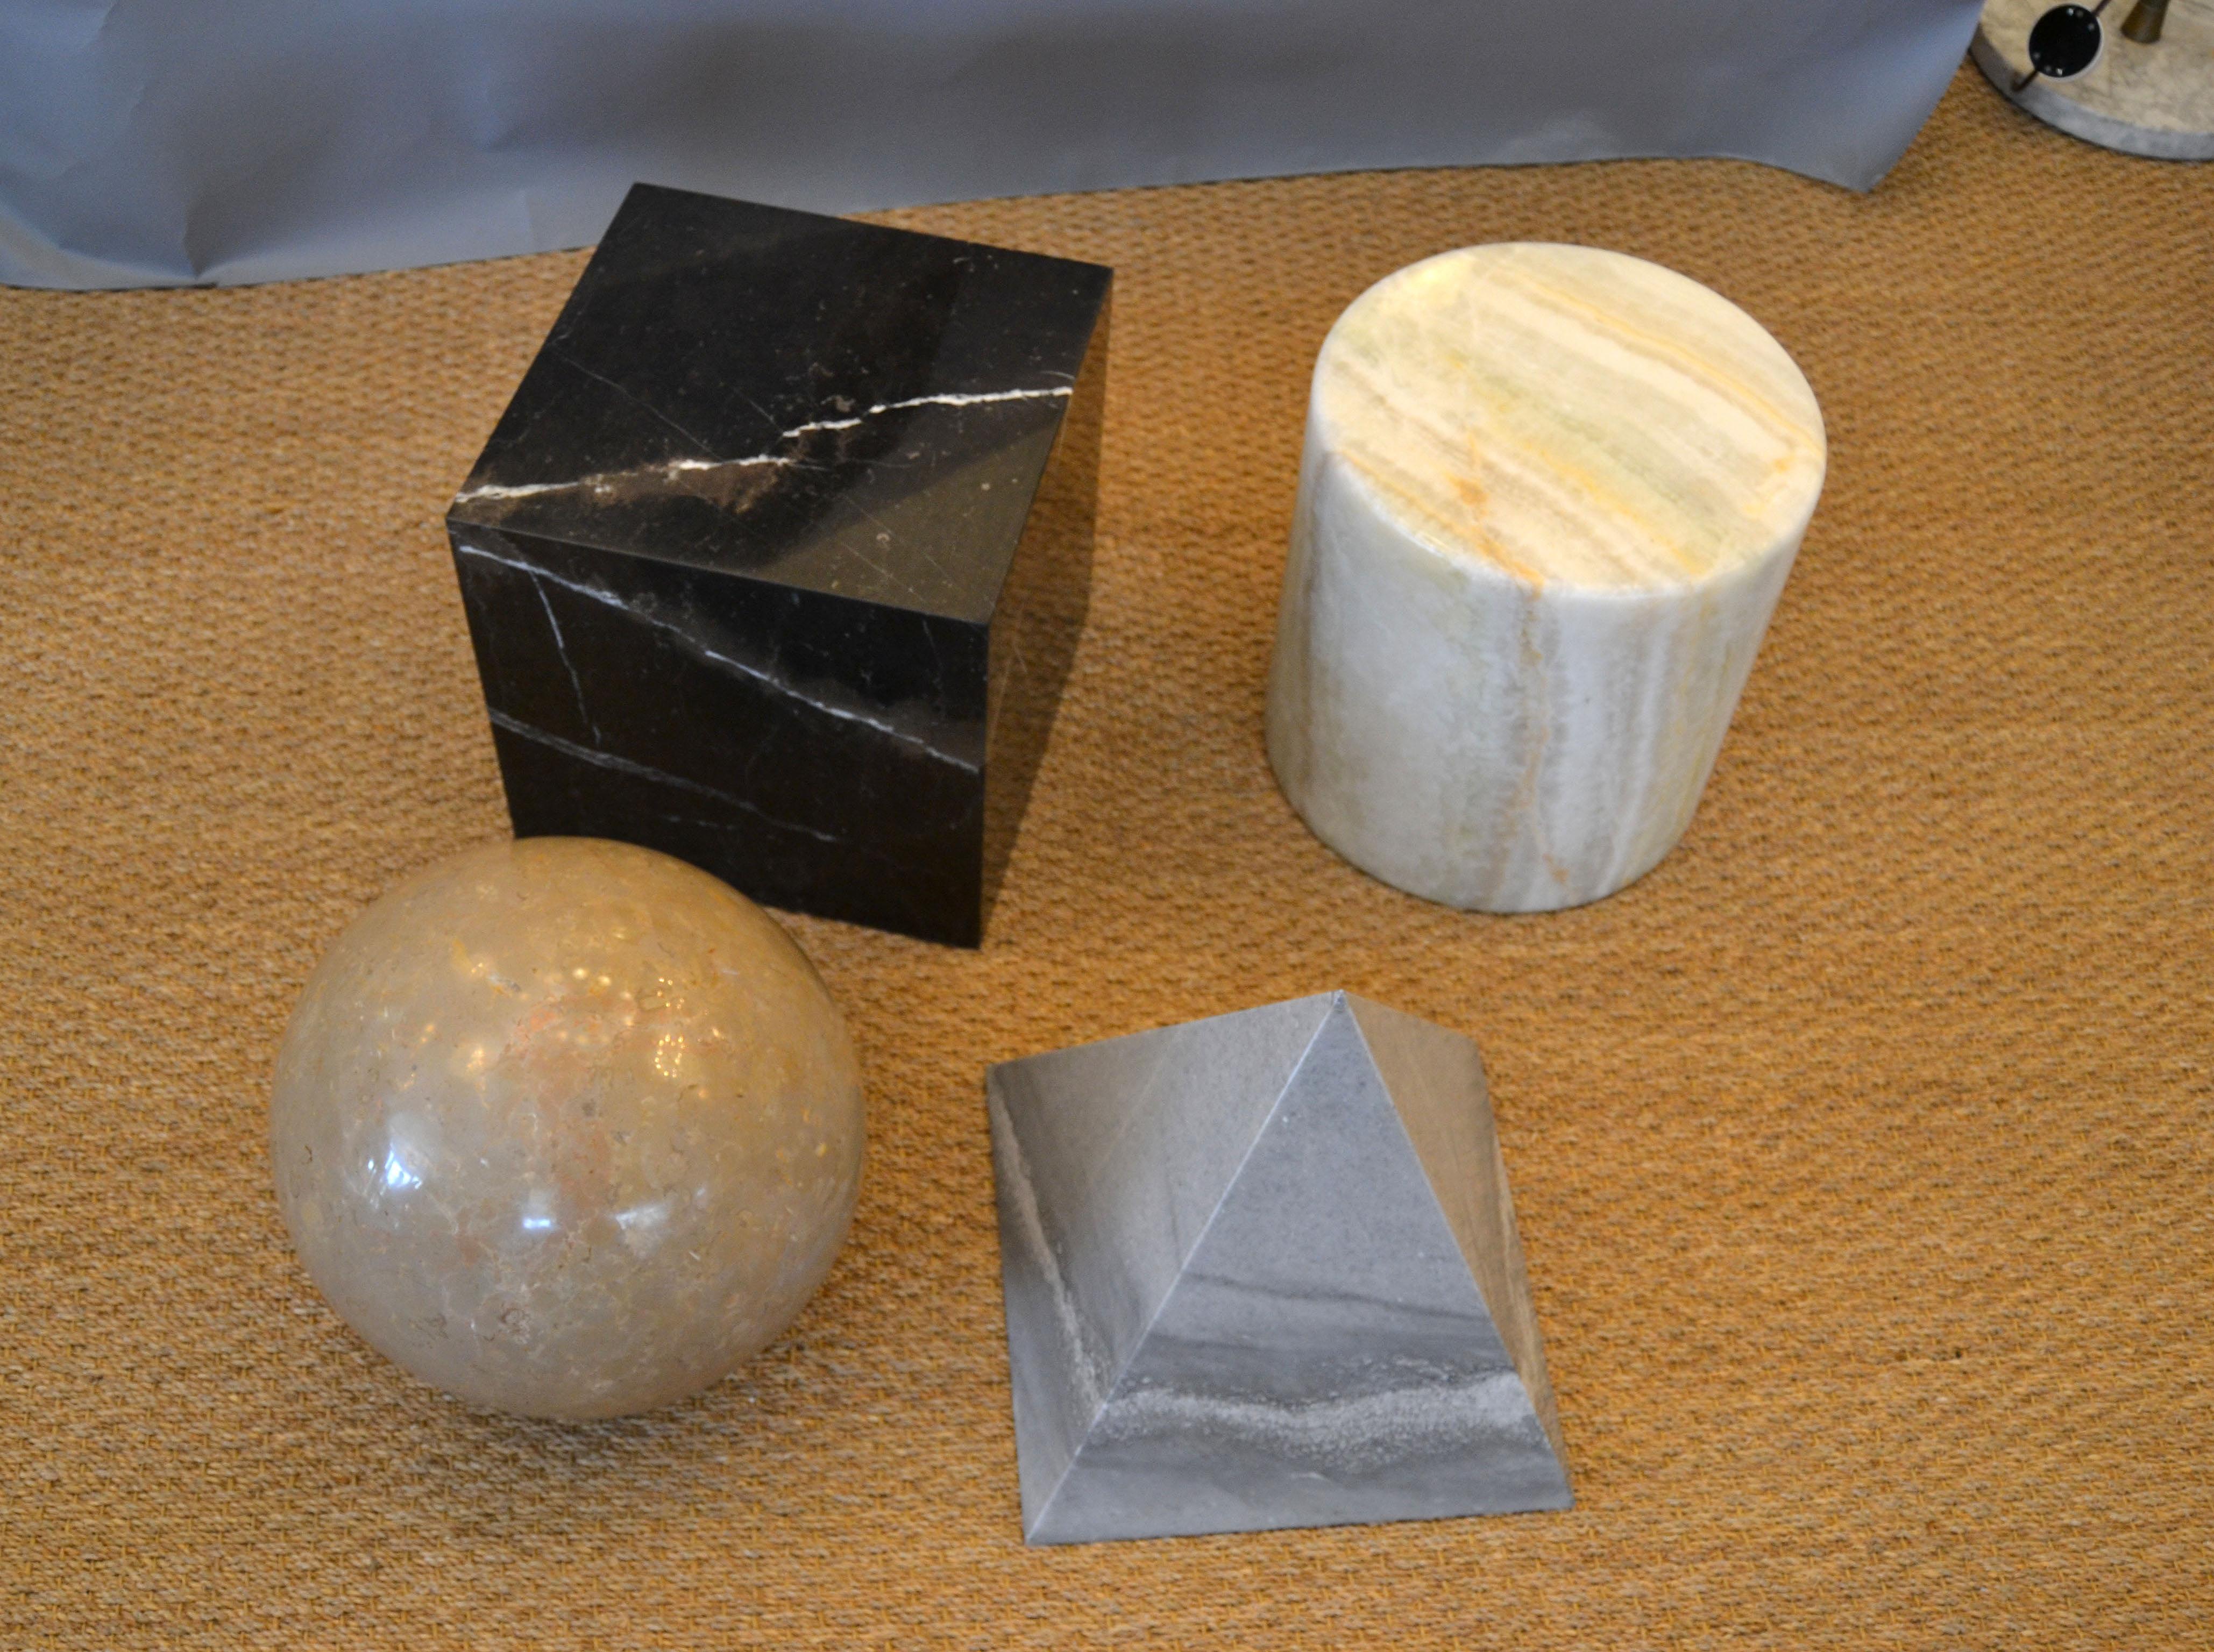 Italian 'Metafora' marble and onyx coffee table base by Lella and Massimo Vignelli for Martinelli Luce.
The four geometric shapes, a cube, a cylinder, a sphere and a pyramid are made out of marble and onyx.
Made in Italy, 1970s.
Note: No square